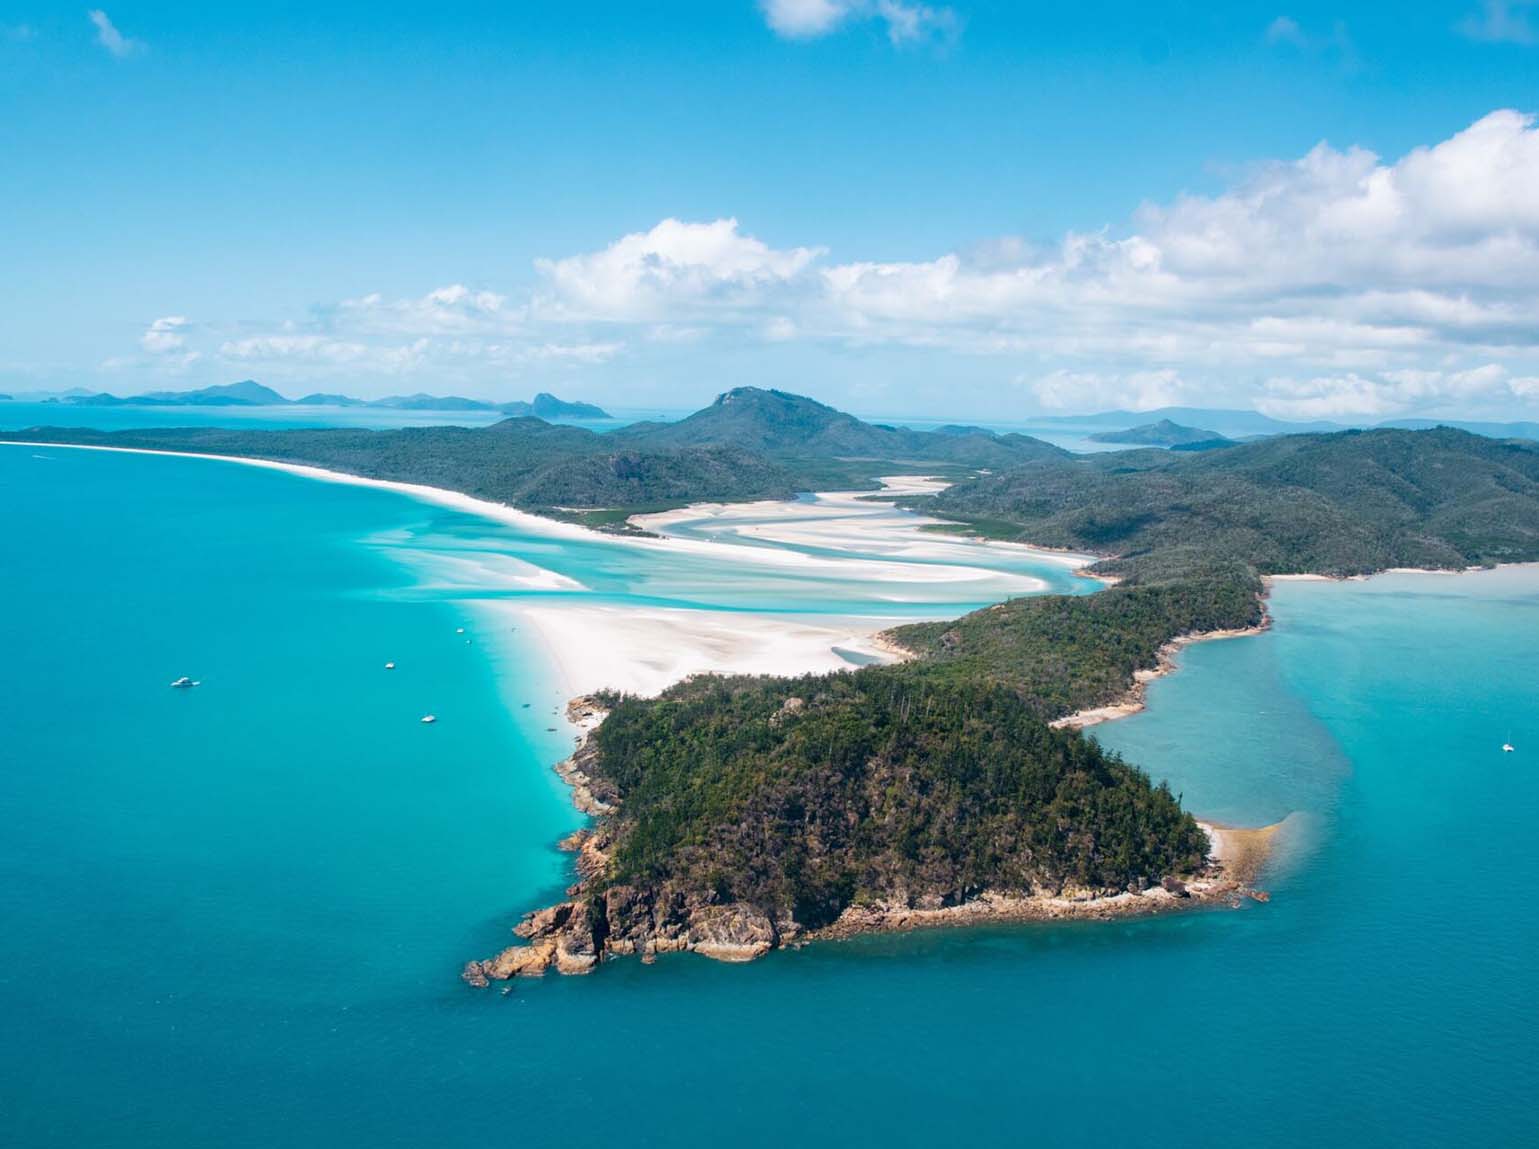 Romantic Retreats: Planning a Dreamy Getaway in the Whitsundays